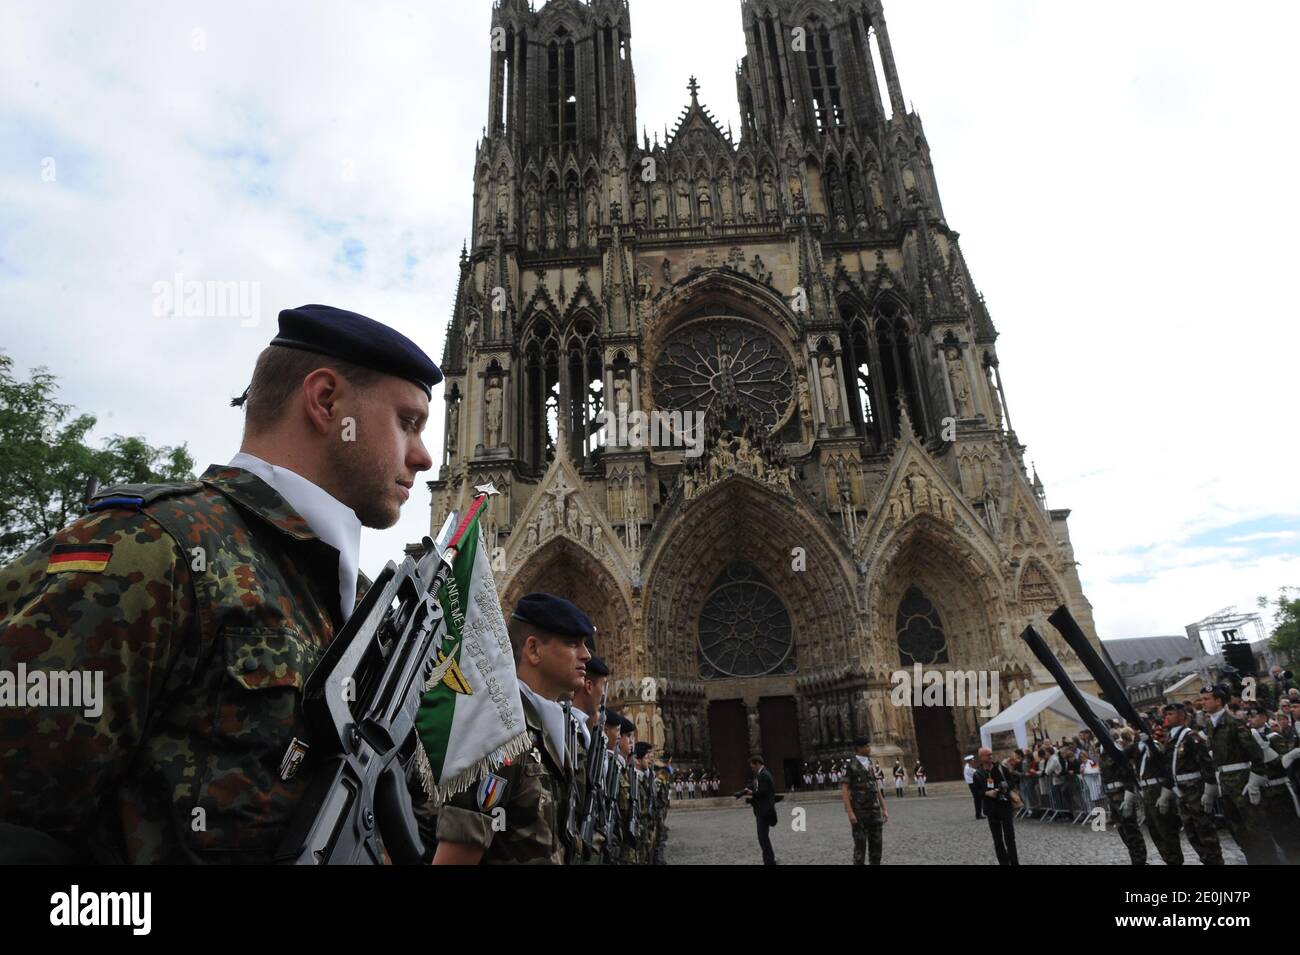 Soldiers pictured during the celebration of the 50th anniversary of renewed Franco-German relations after World War near the Cathedral Reims, eastern France, on July 8, 2012. The post-war reconciliation is symbolically achieved in 1962 on July 8 by then French president Charles de Gaulle and former chancellor Konrad Adenauer. Photo by Mousse/ABACAPRESS.COM Stock Photo